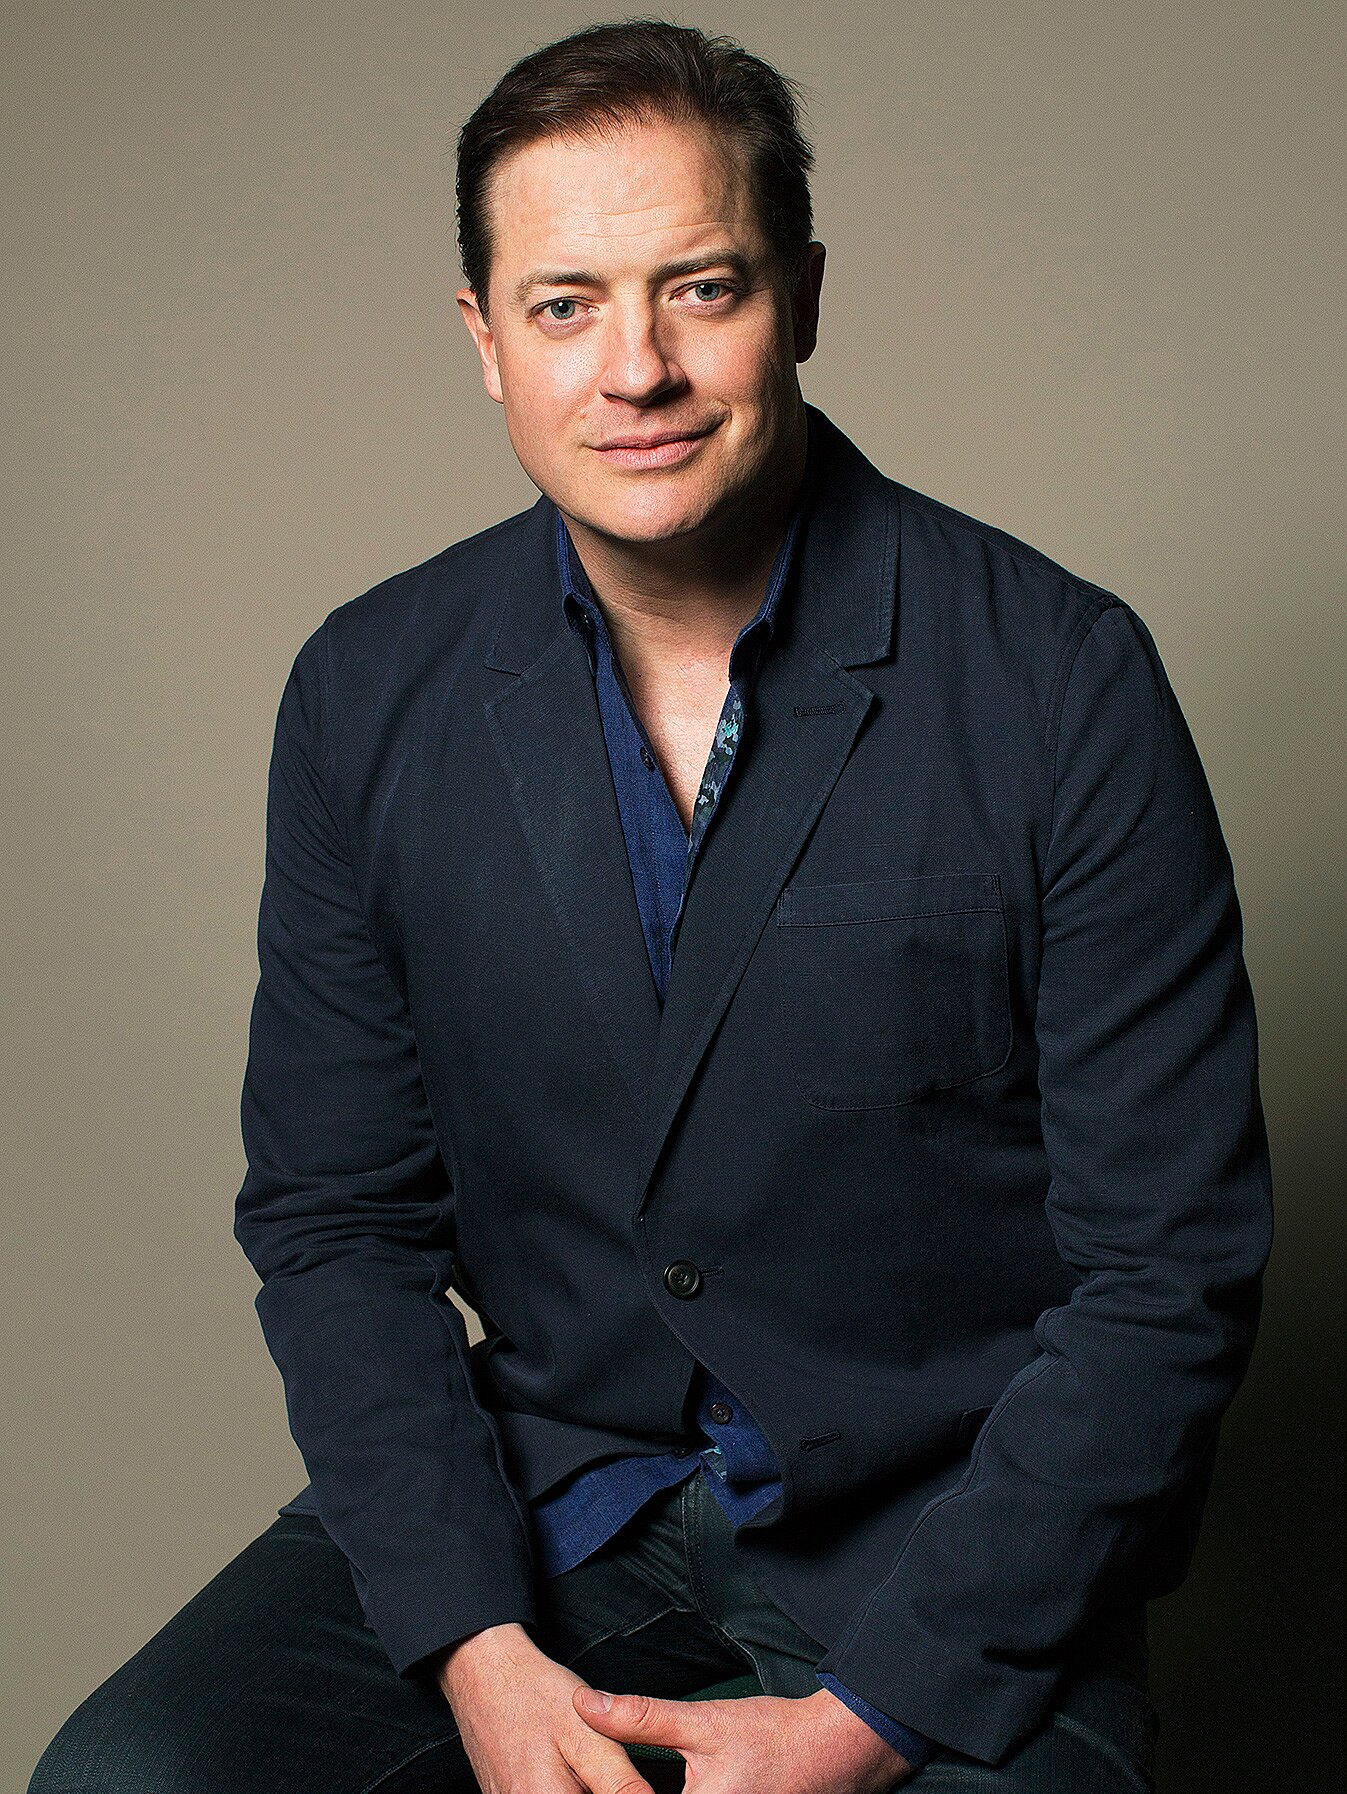 Happy birthday to my one and only favorite wholesome himbo Brendan Fraser 